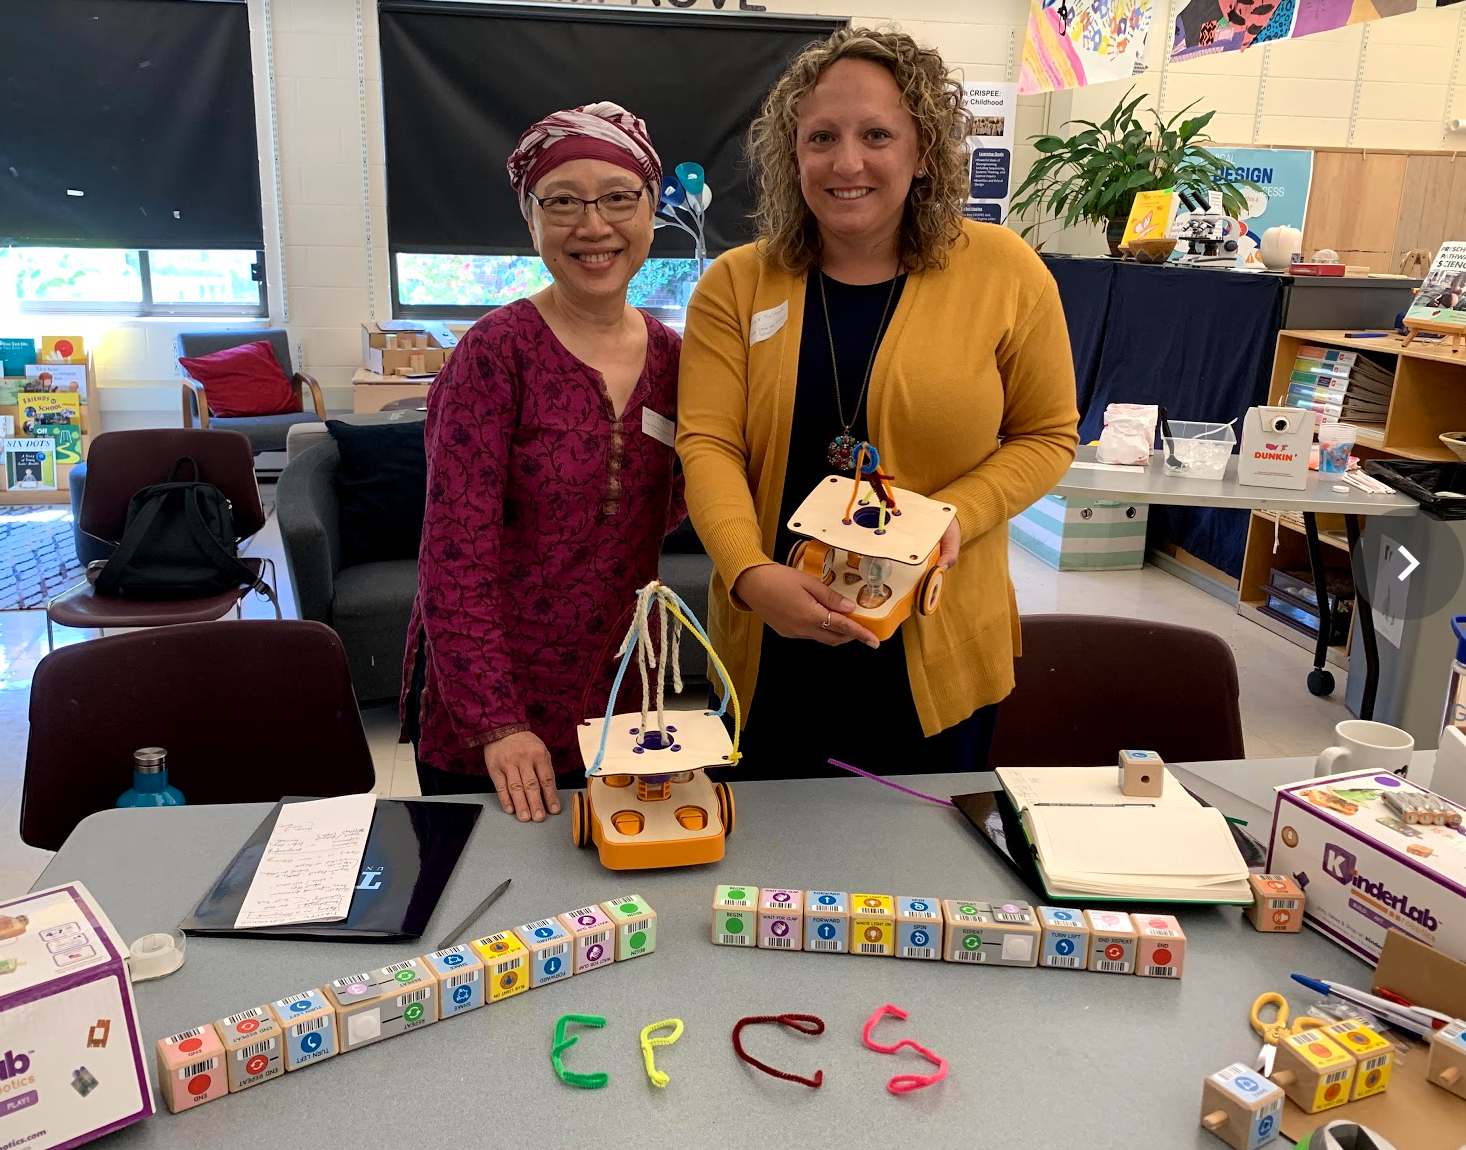 Two early-childhood teachers pose with the KIBO robot project